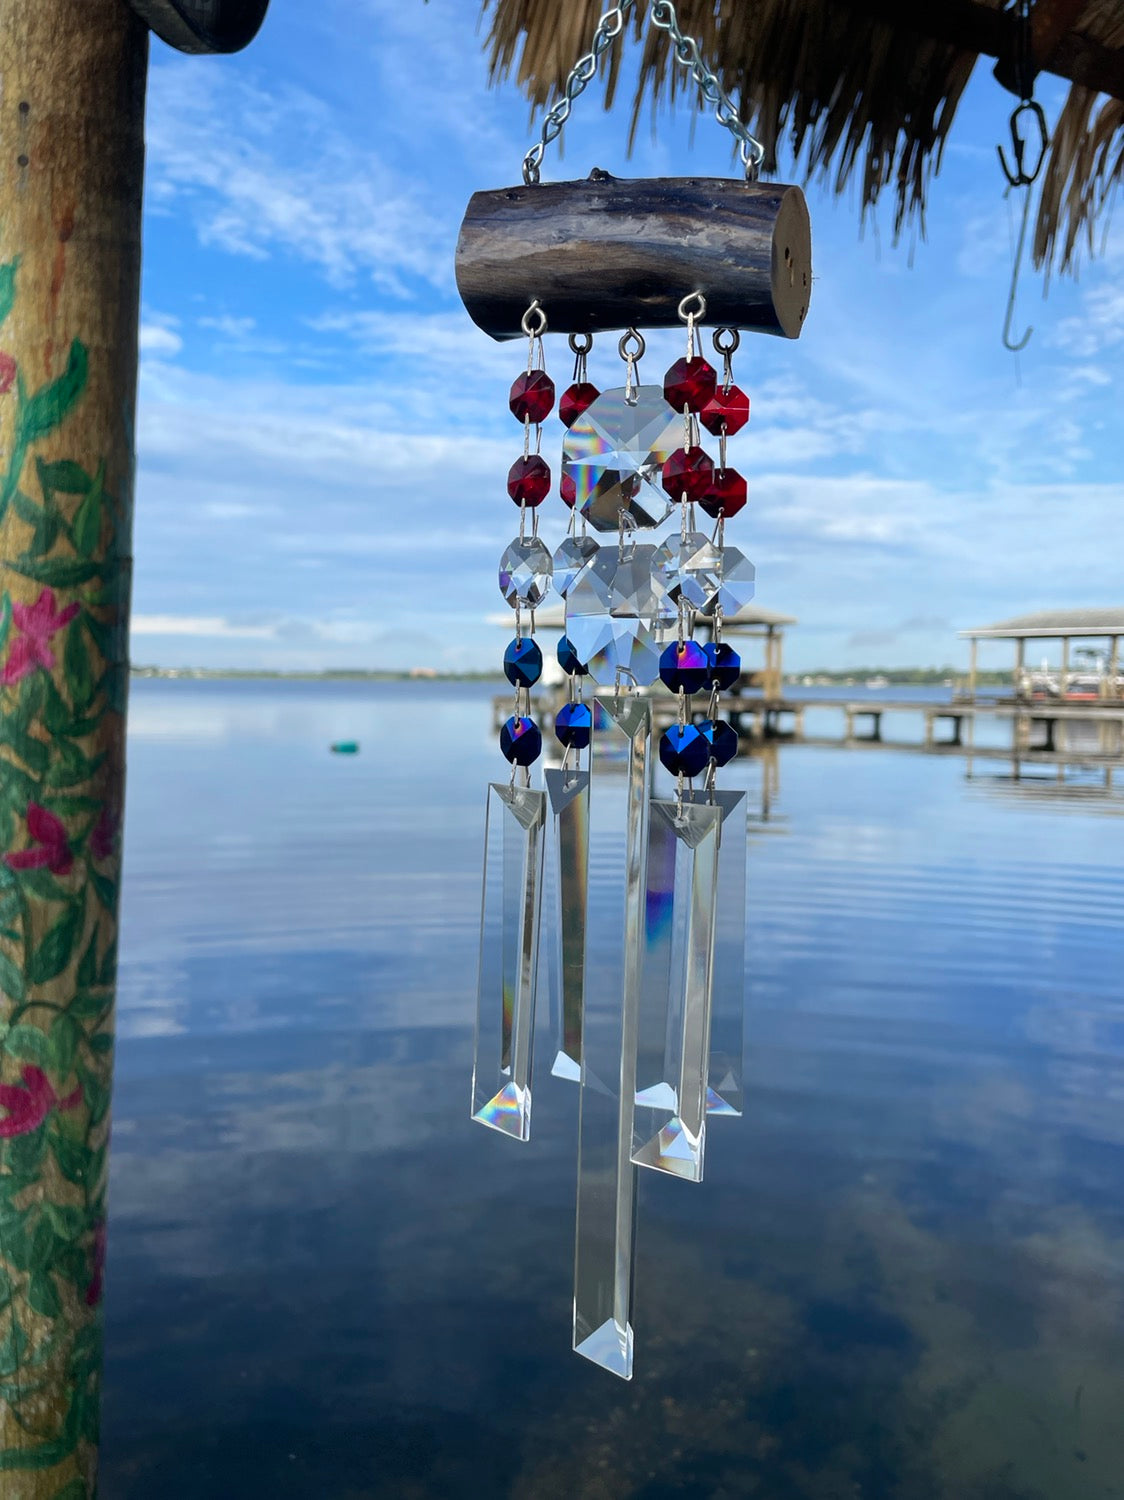 driftwood wind-chime chandelier crystals red, white, and blue unique gift handmade art